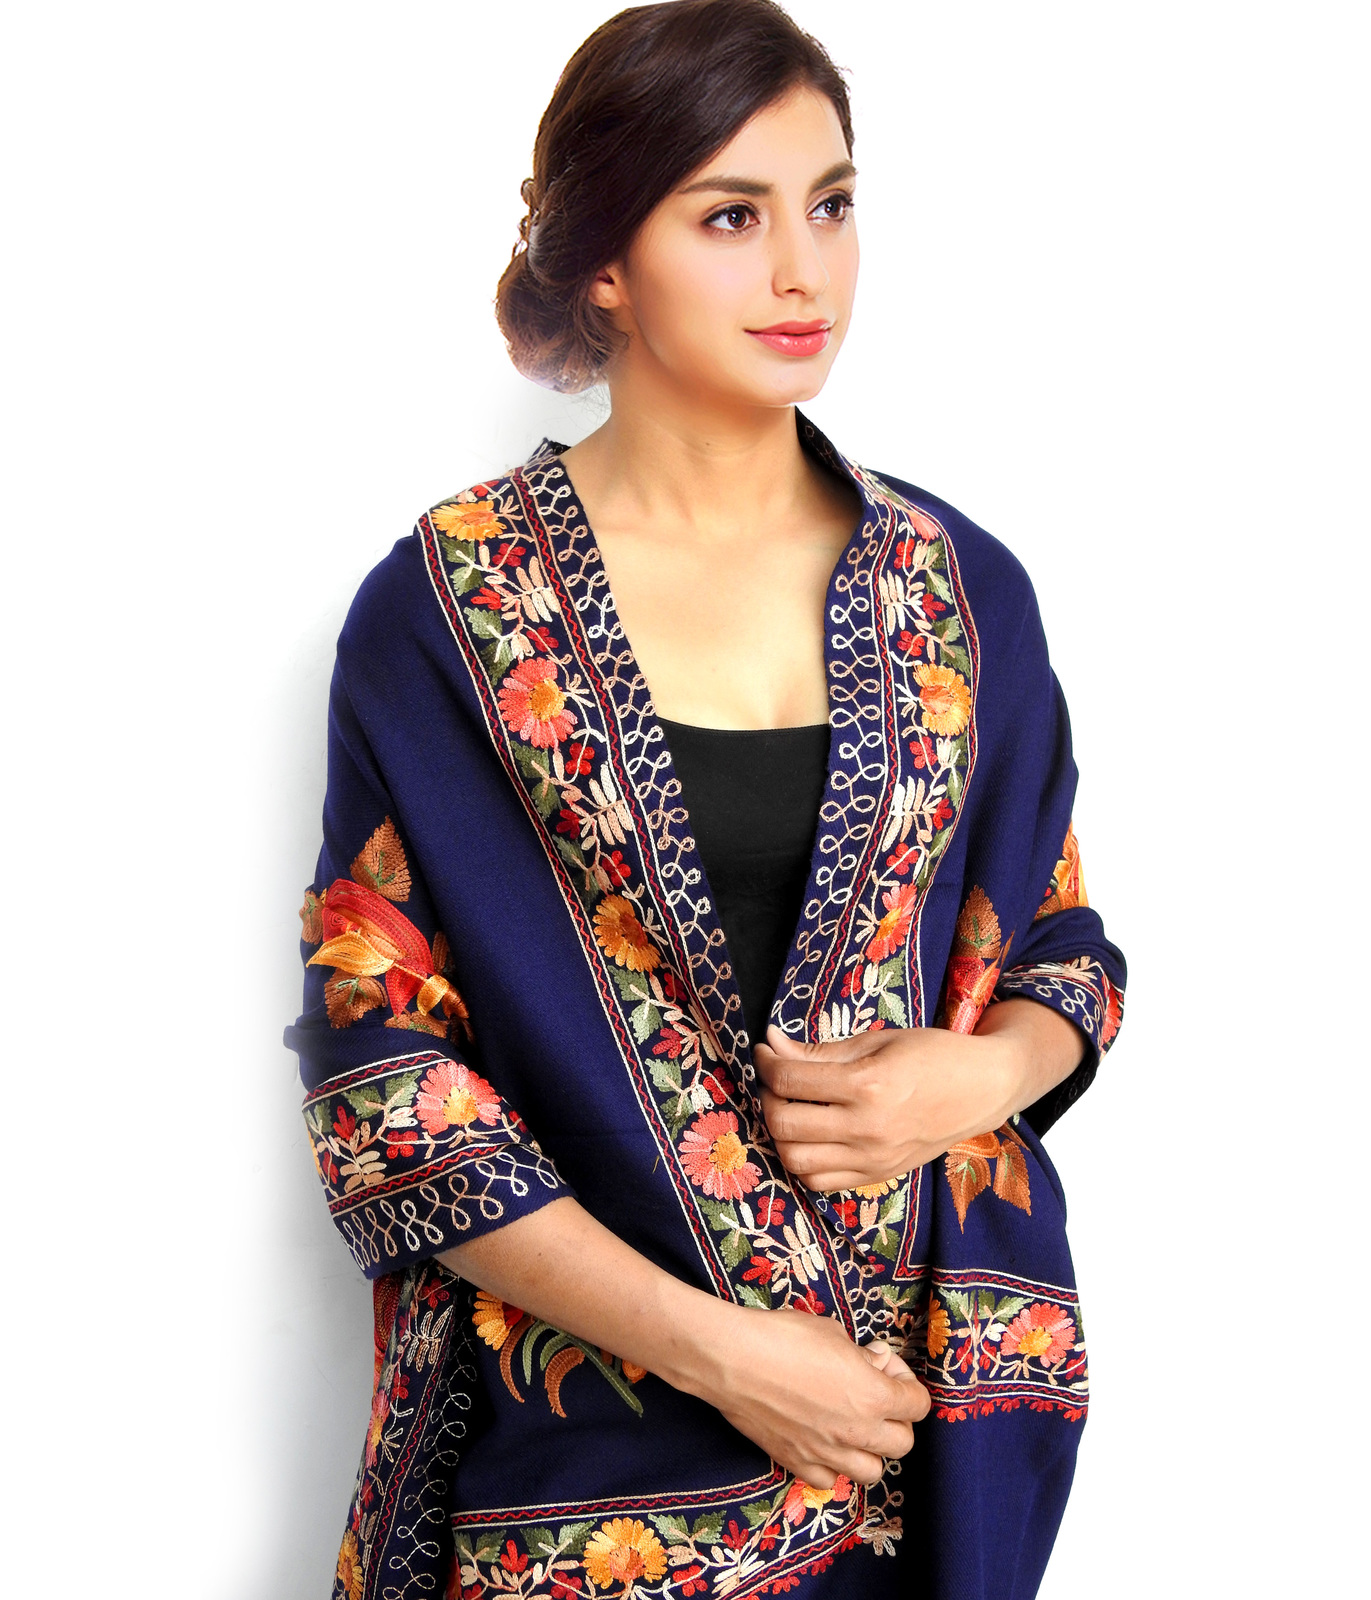 Primary image for Women Aari Kashmiri Blue Stole Ethnic Flower Embroidered Wool Shawl Cashmere